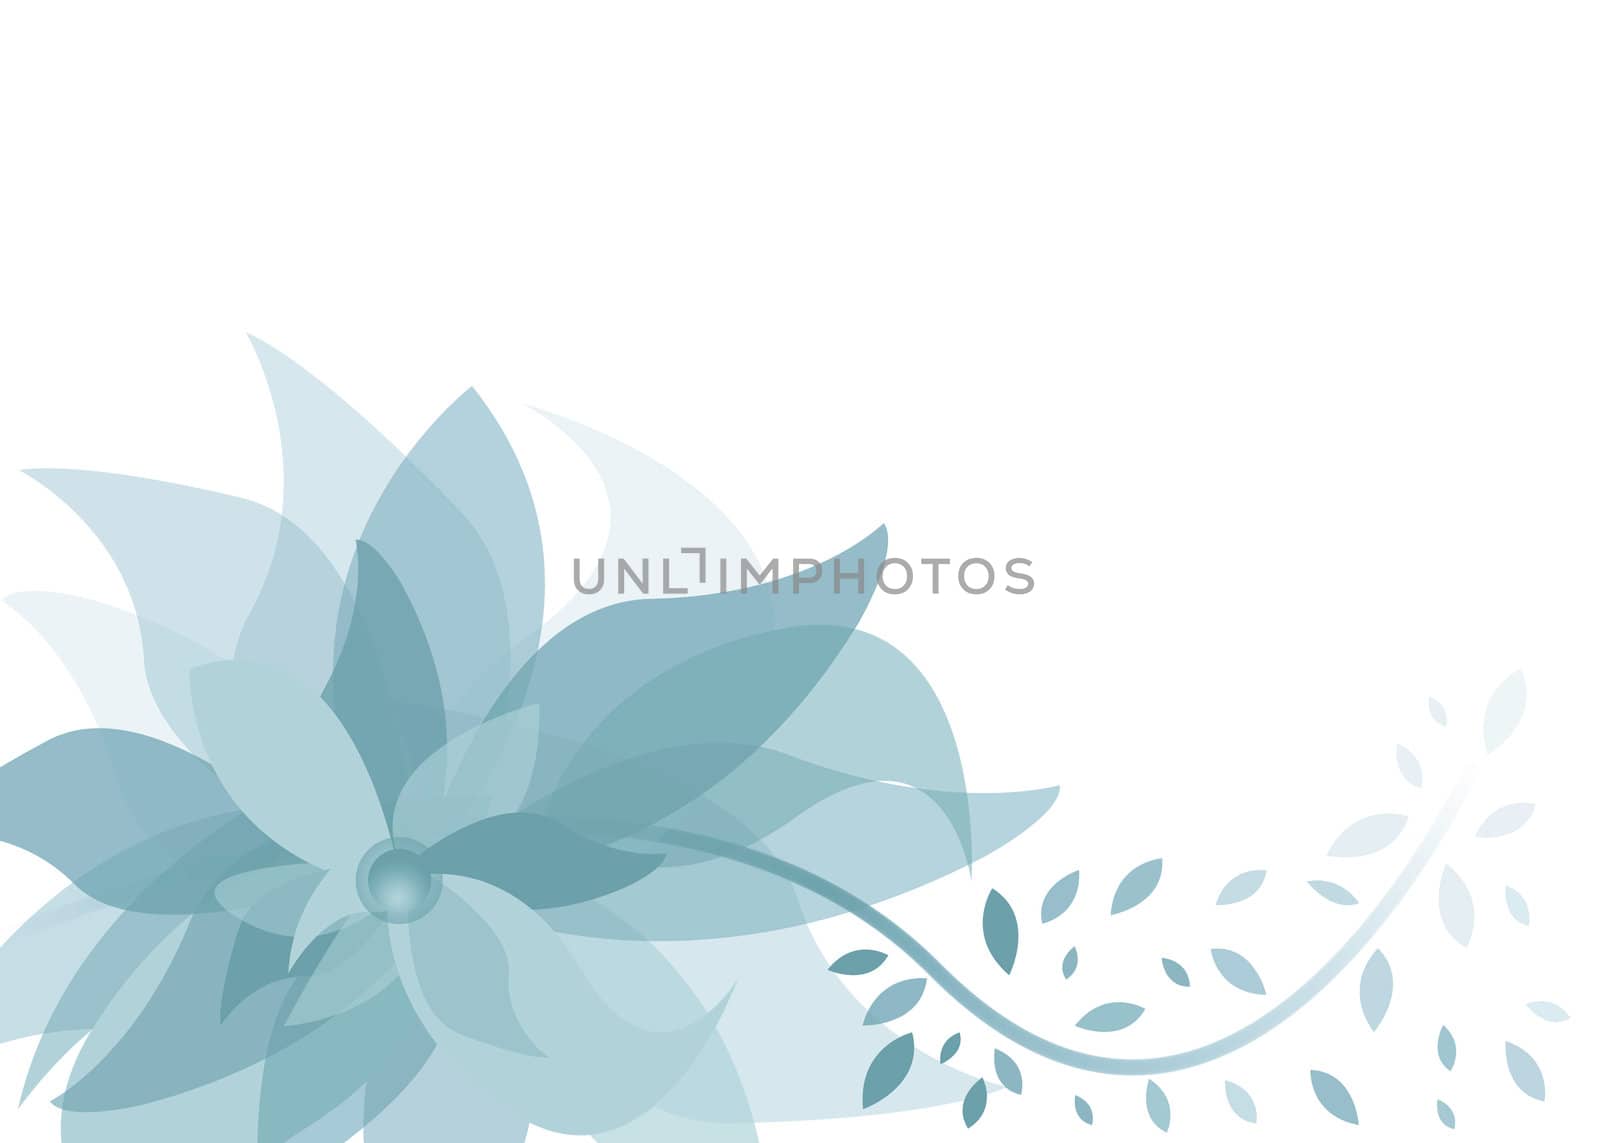 A beautiful blue flower background with abstract petals and leaves